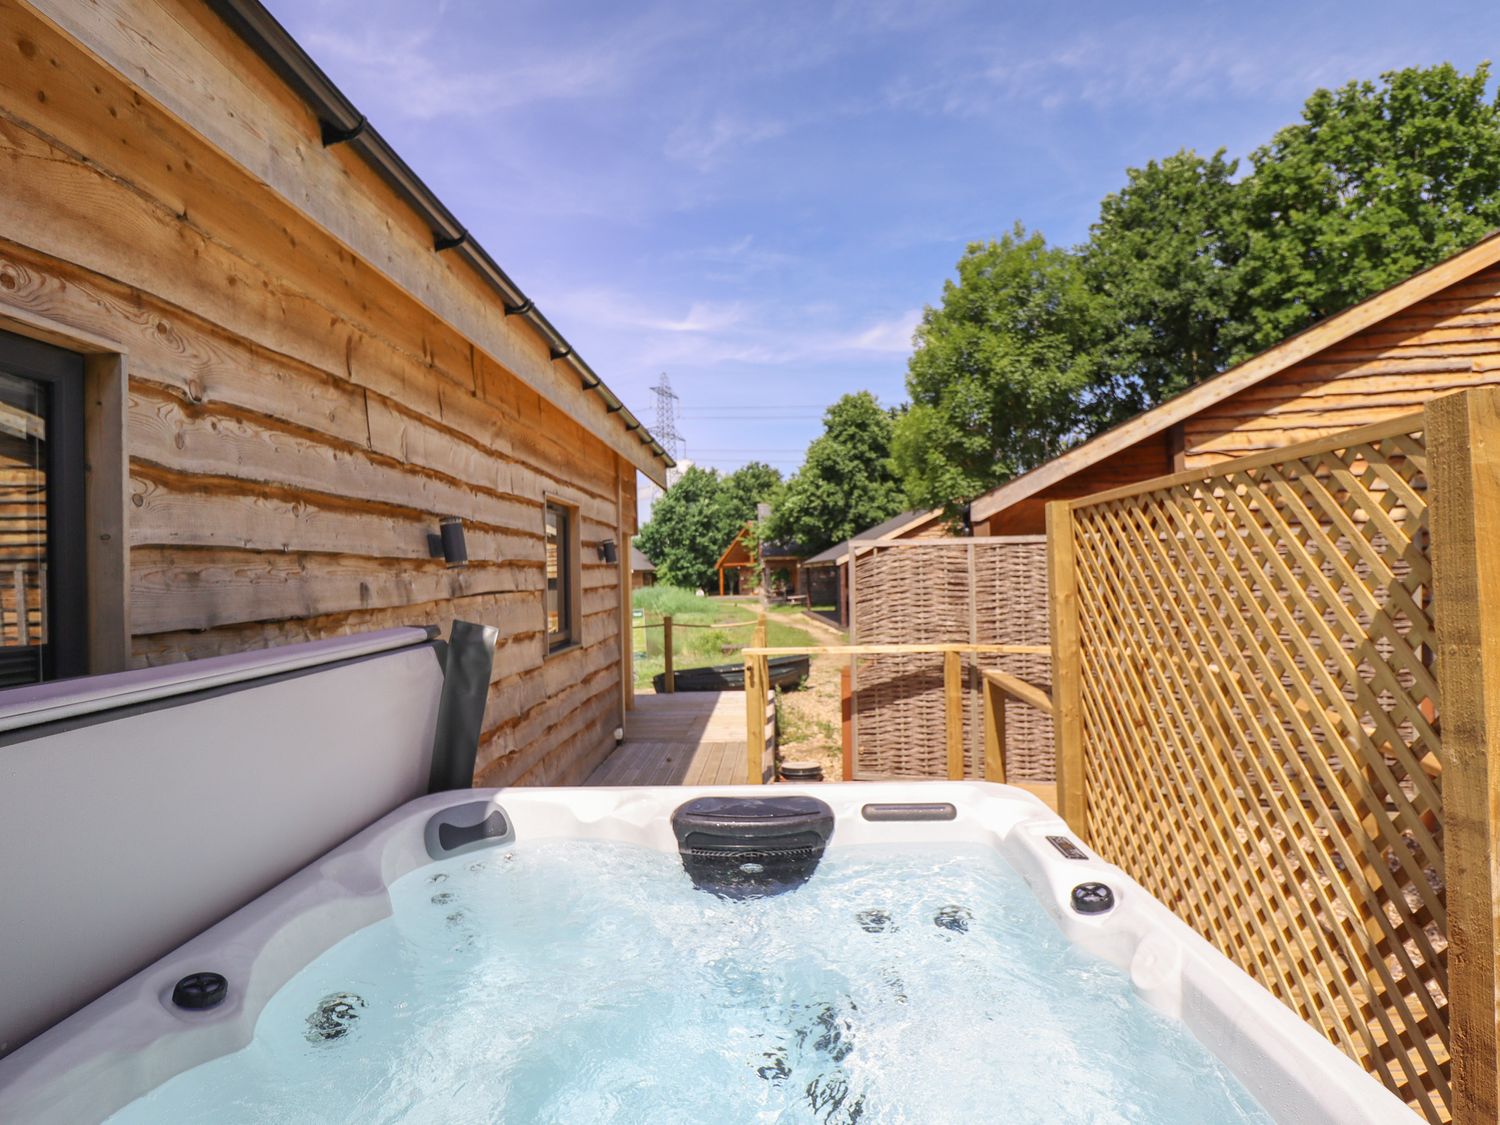 Lodge 21, South Hykeham, Lincolnshire, decking area with hot tub, lakeside views, off-road parking.